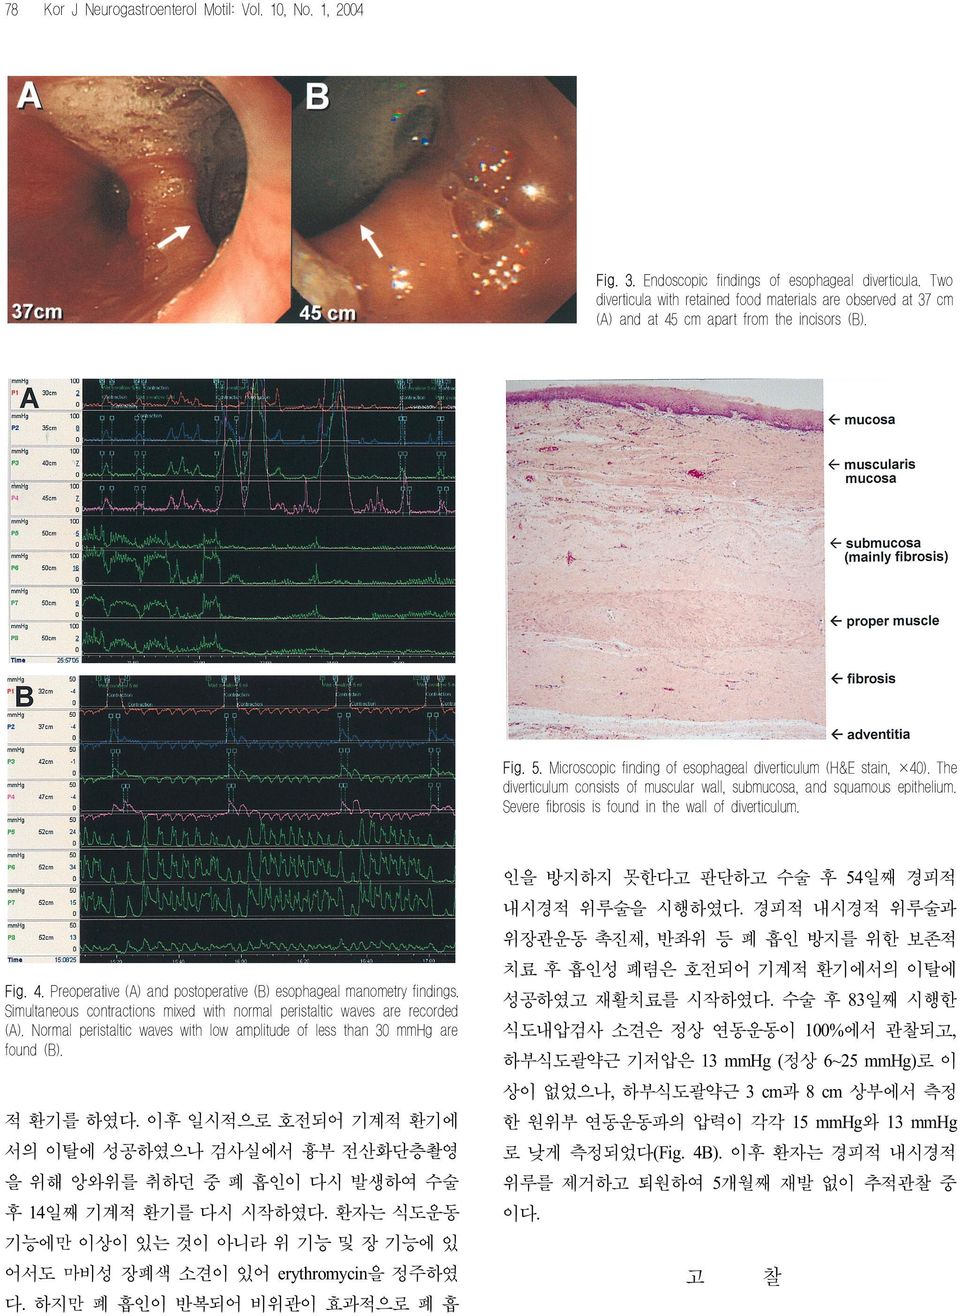 The diverticulum consists of muscular wall, submucosa, and squamous epithelium. Severe fibrosis is found in the wall of diverticulum. 인을 방지하지 못한다고 판단하고 수술 후 54일째 경피적 내시경적 위루술을 시행하였다.